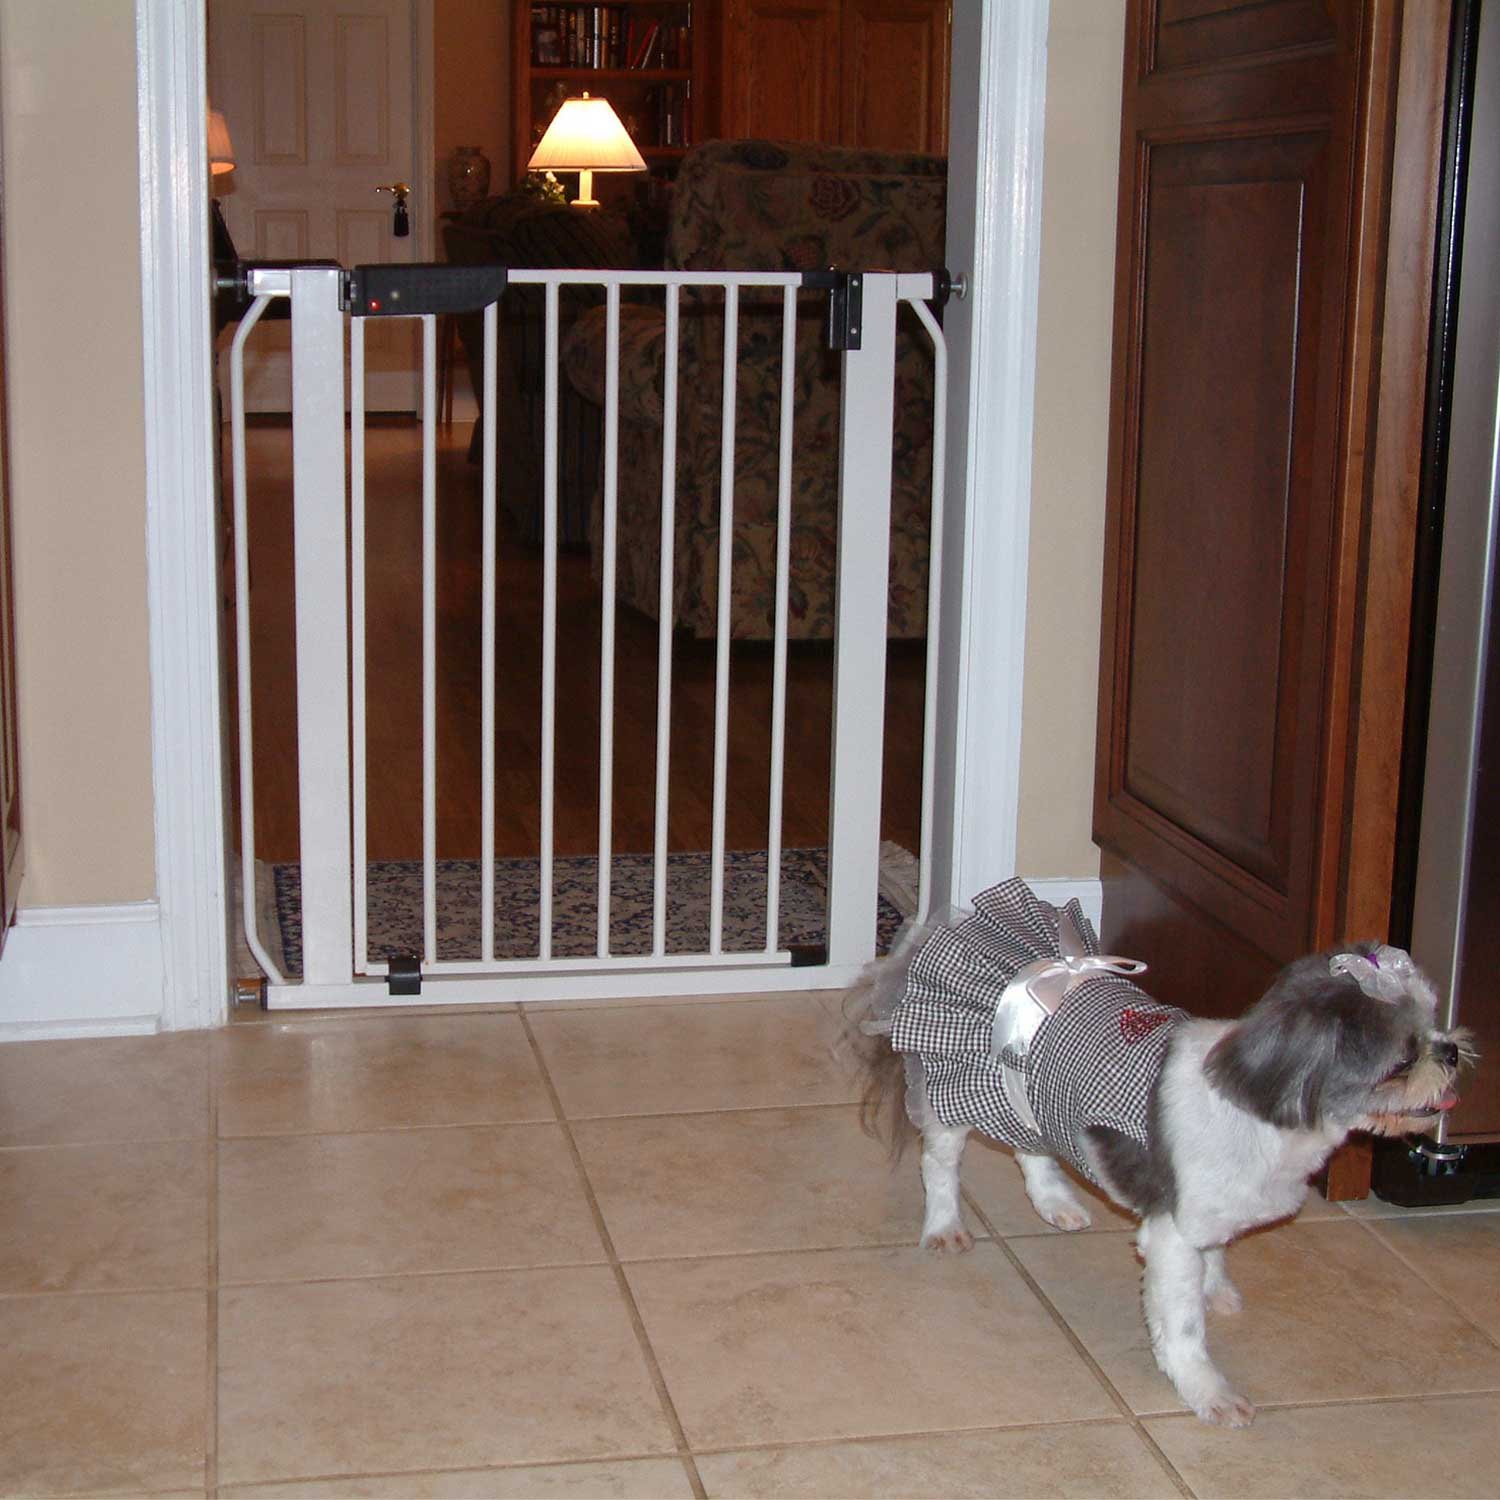 UPC 635035005043 product image for Cardinal Gates White Auto-Lock Pressure Pet Gate (Adjustable From 29